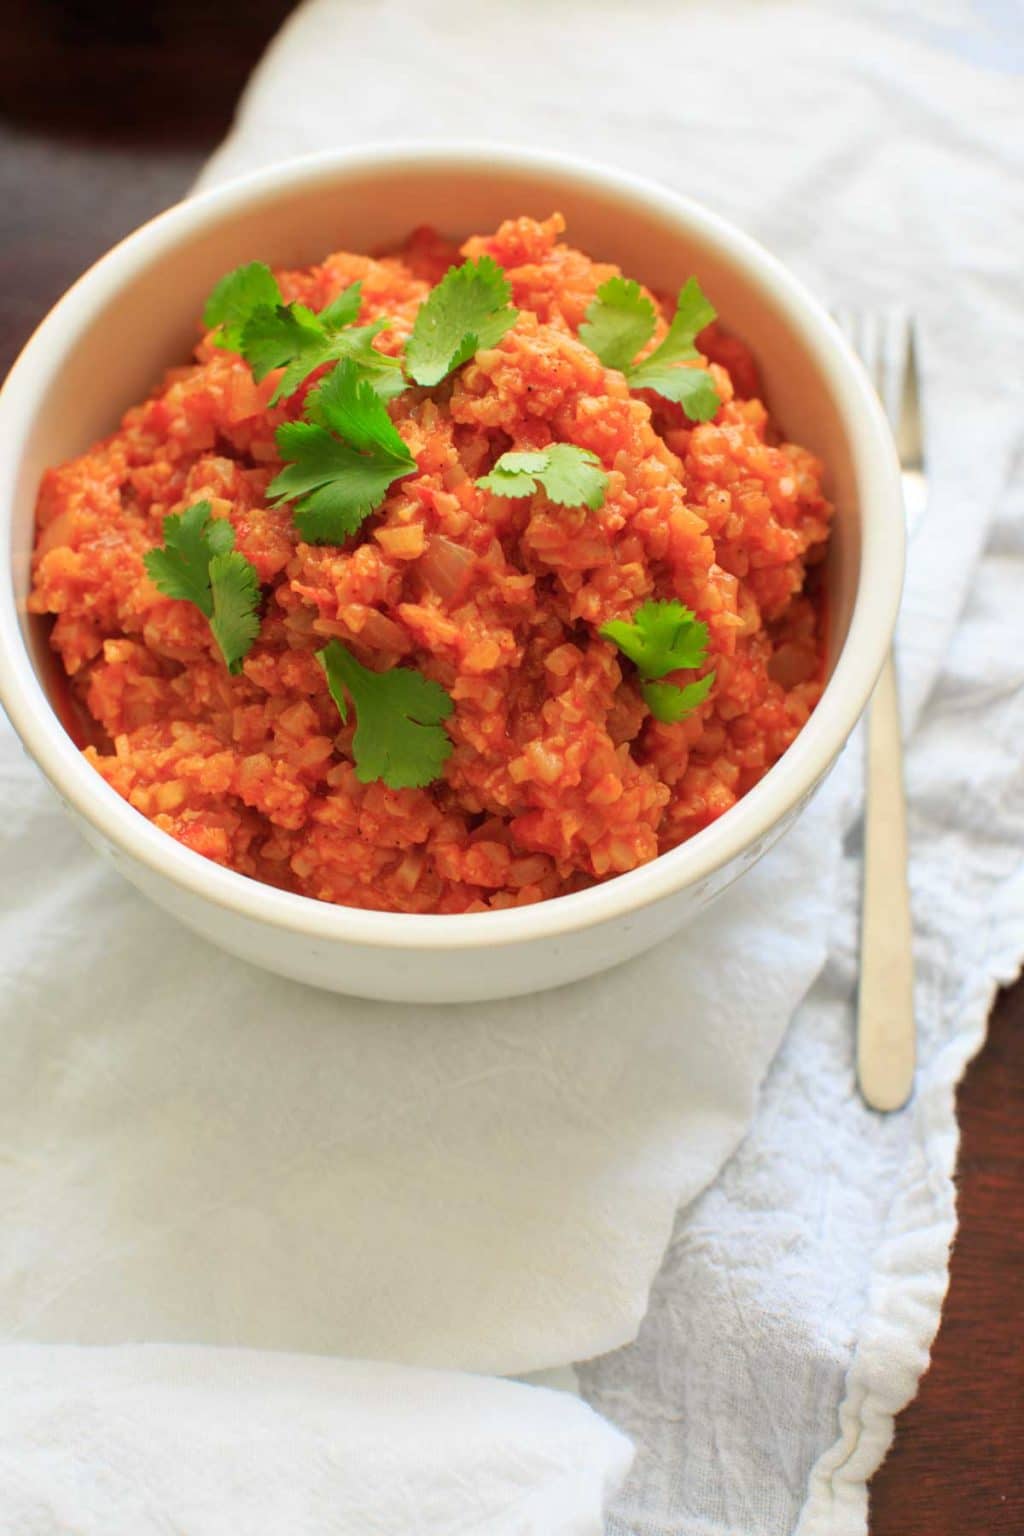 Spanish Cauliflower Rice - a grain-free substitute for Spanish rice that's quick and healthy. Vegan and gluten-free option.